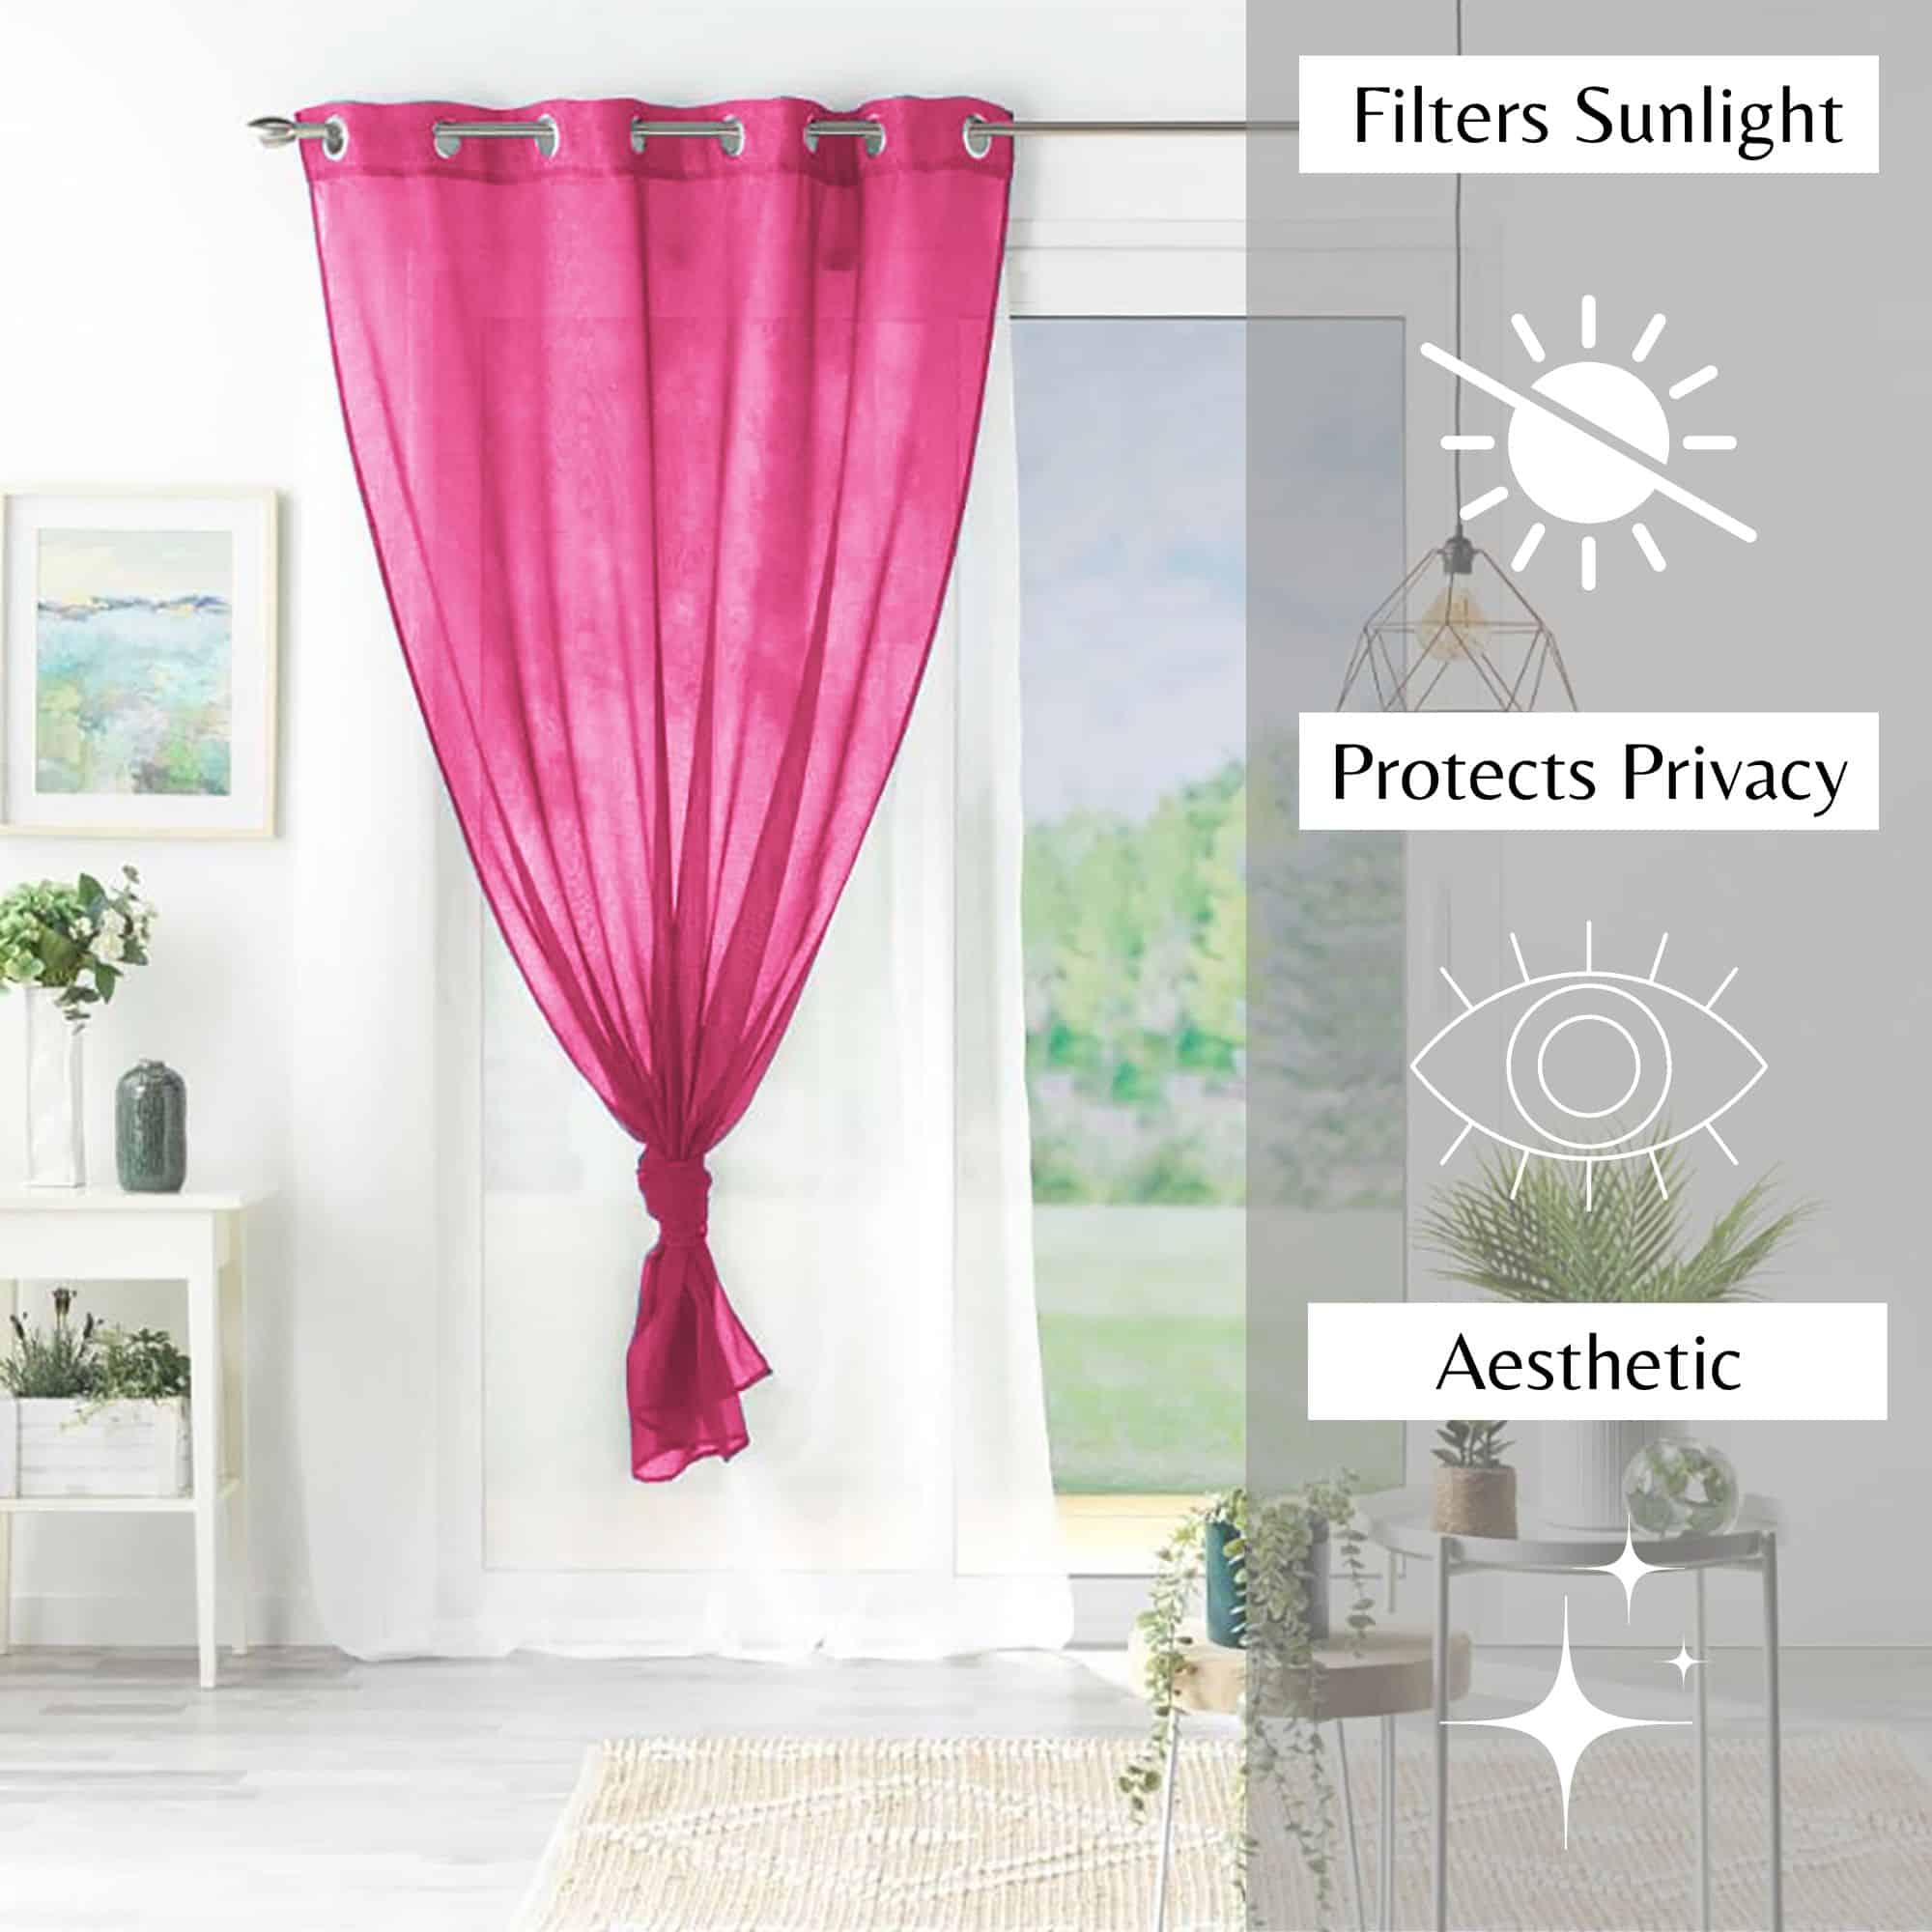 filter sunlight protect privacy aesthetic fuchsia pink and white voile curtain panels x 2 for interior design